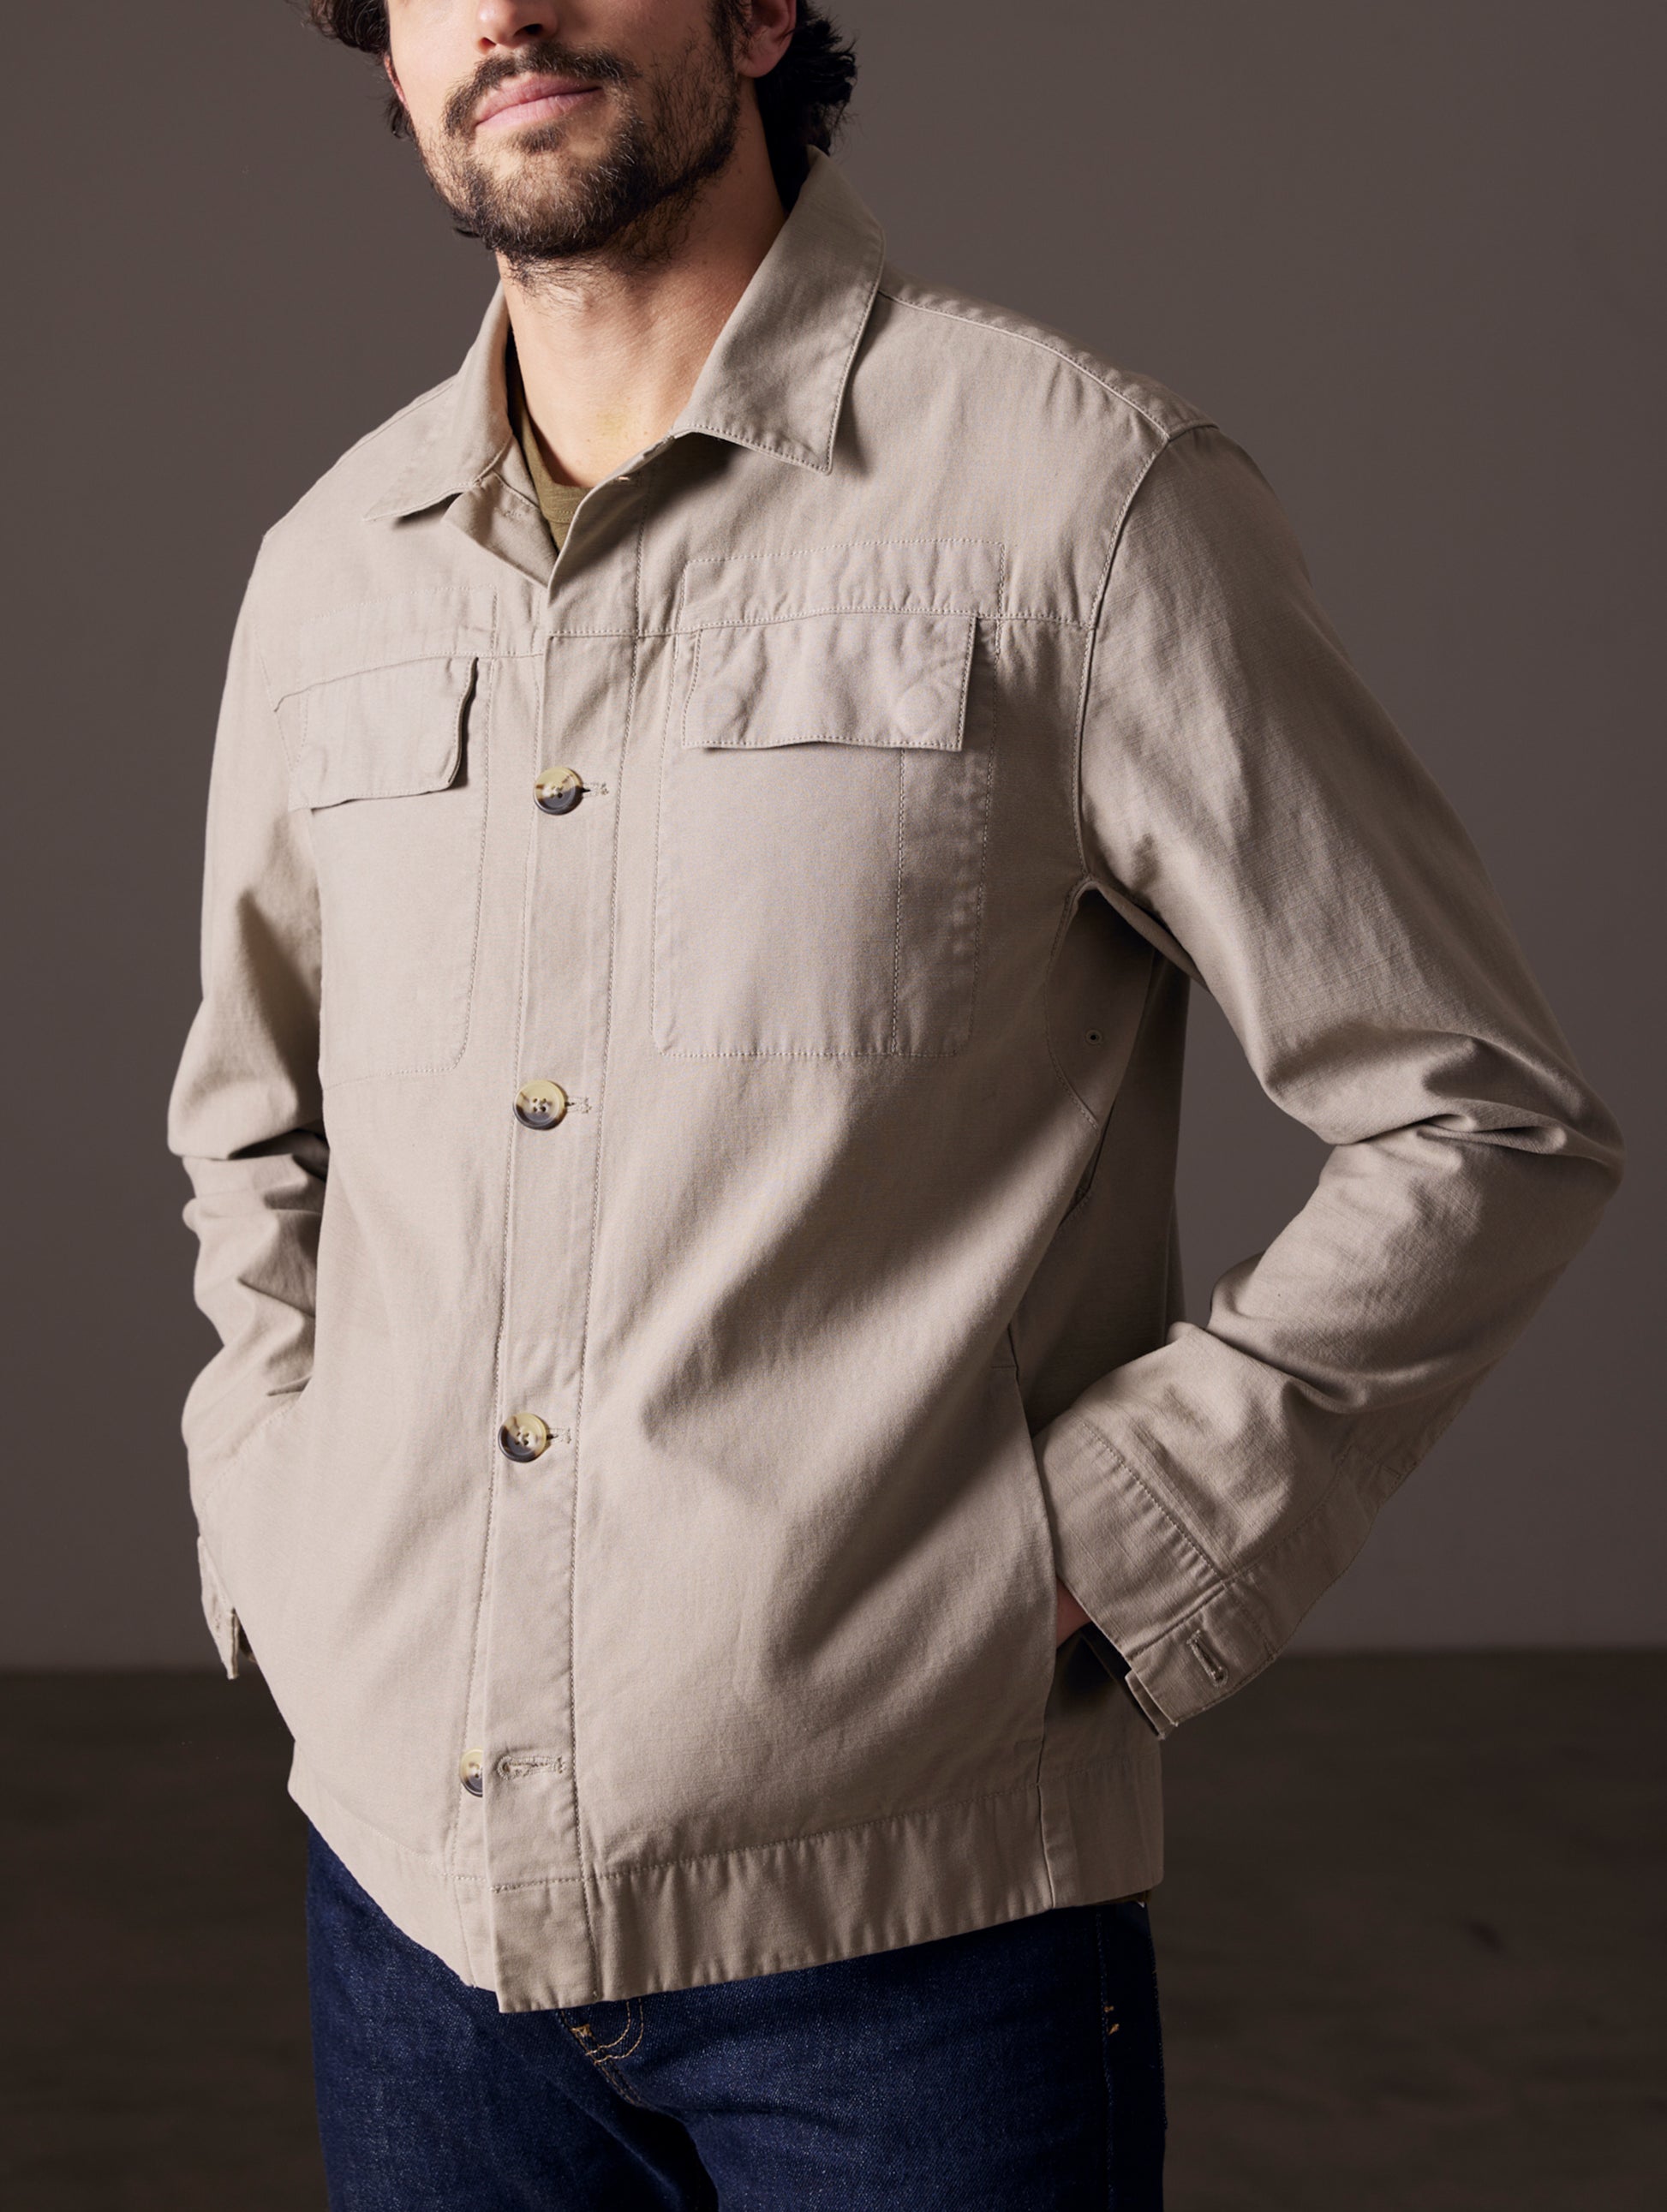 Man wearing light grey shirt jacket from AETHER Apparel